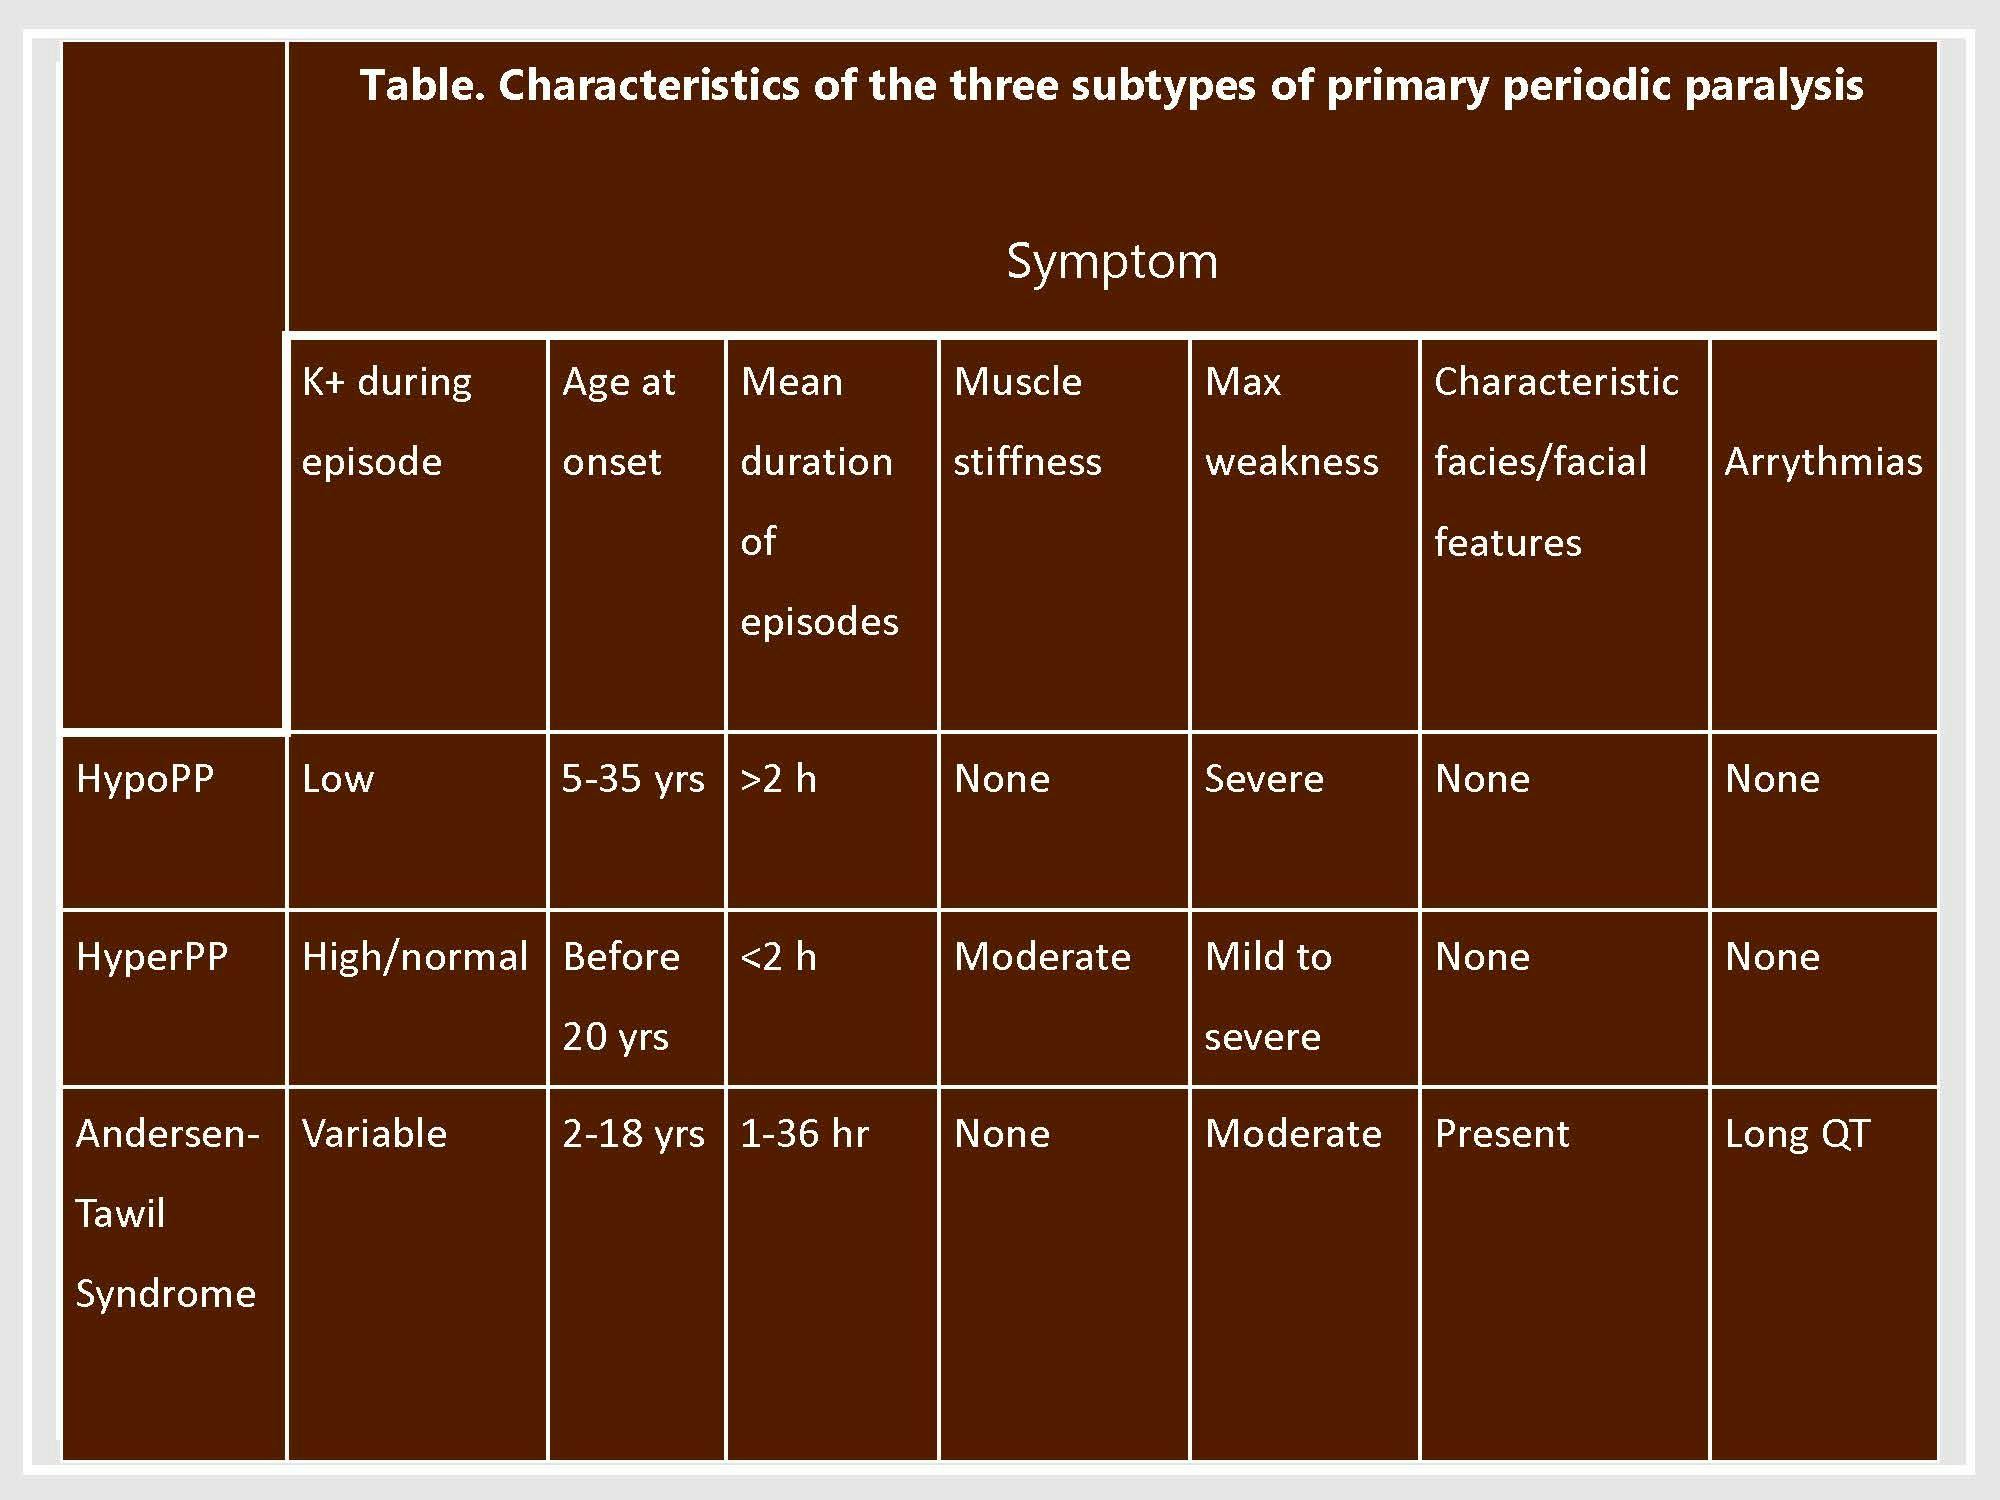 Table. Characteristics of the three subtypes of primary periodic paralysis